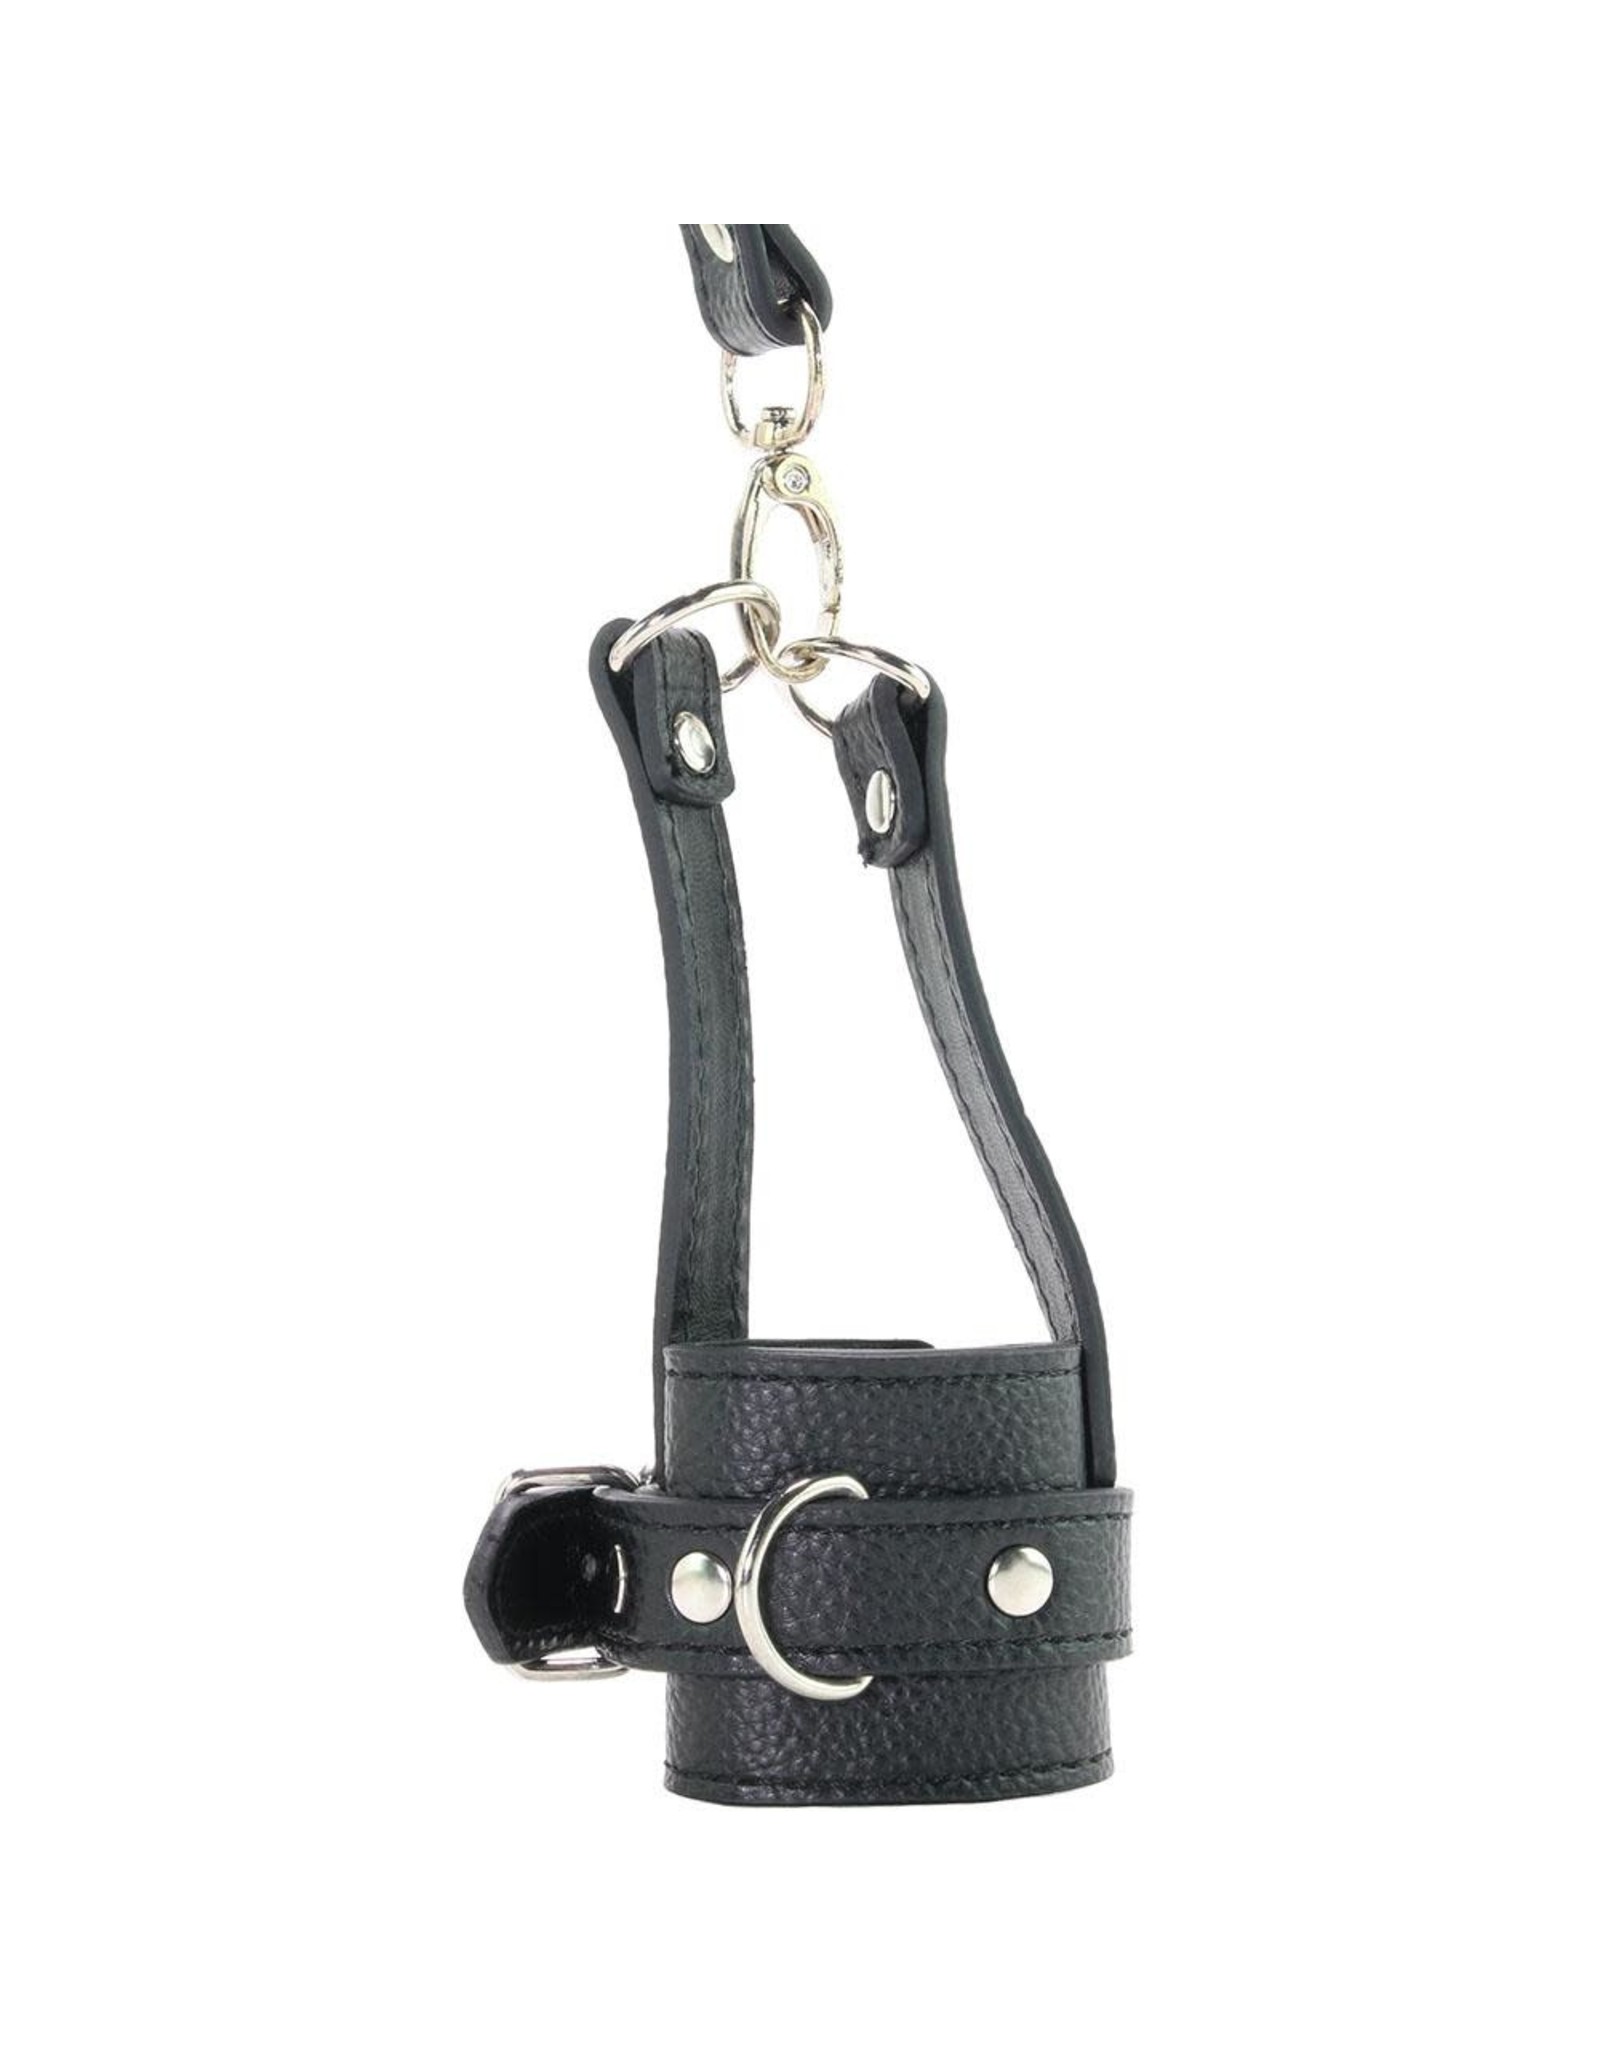 Mistress - Ball Stretcher Trainer Set With Leash